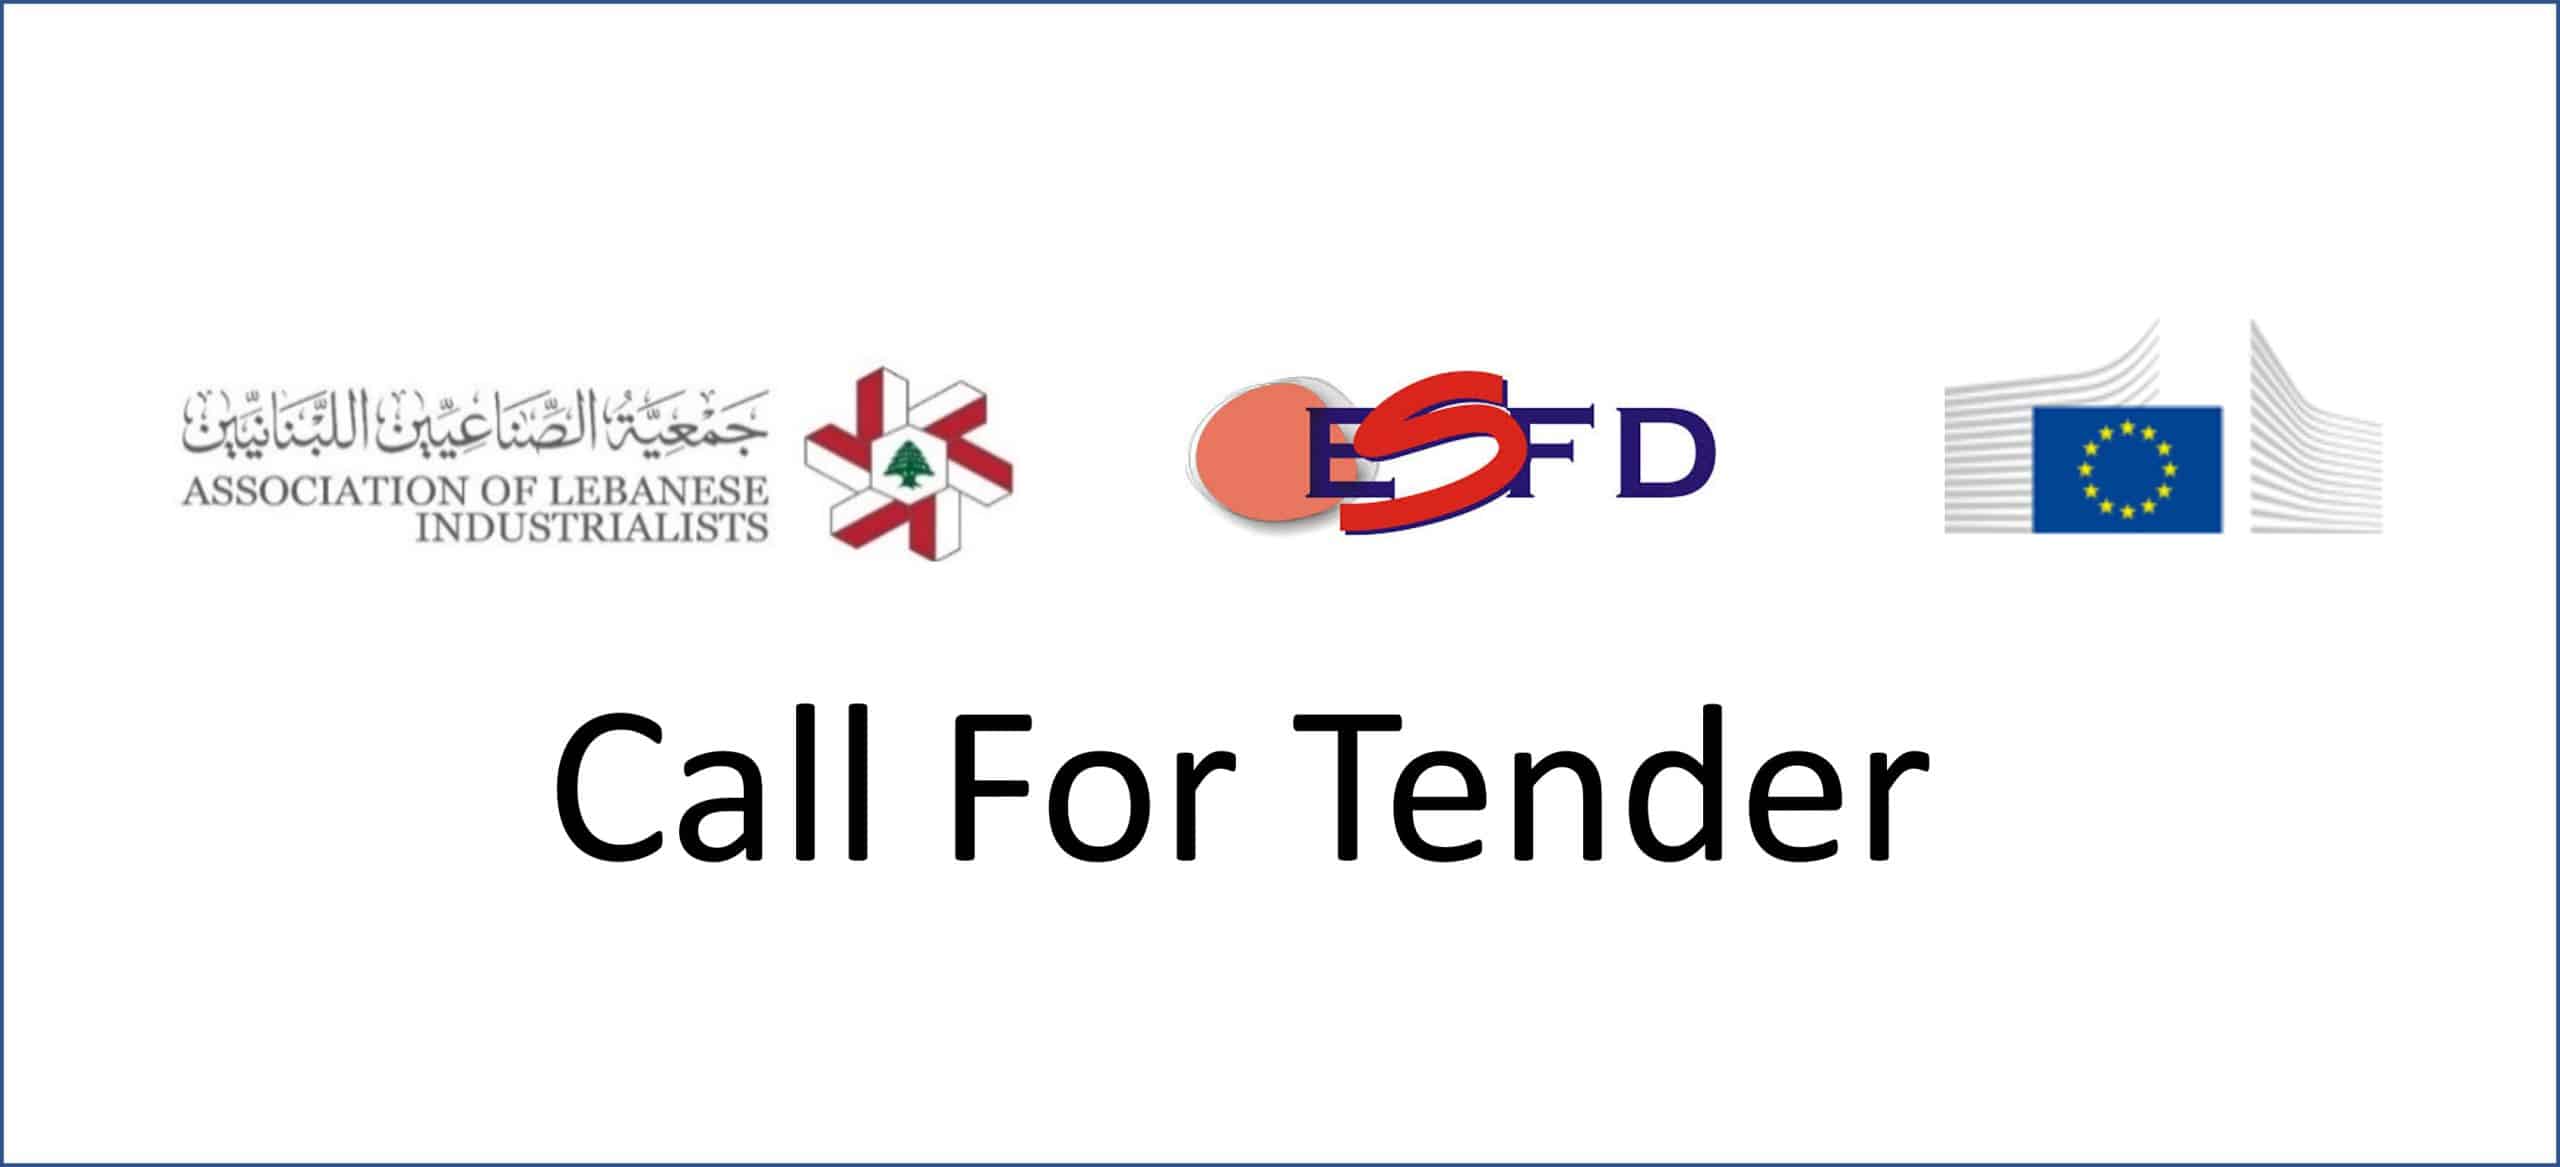 Tender for the Implementation of Waste Water Treatment Units & Solar PV systems for industrial enterprises in Bekaa, Lebanon